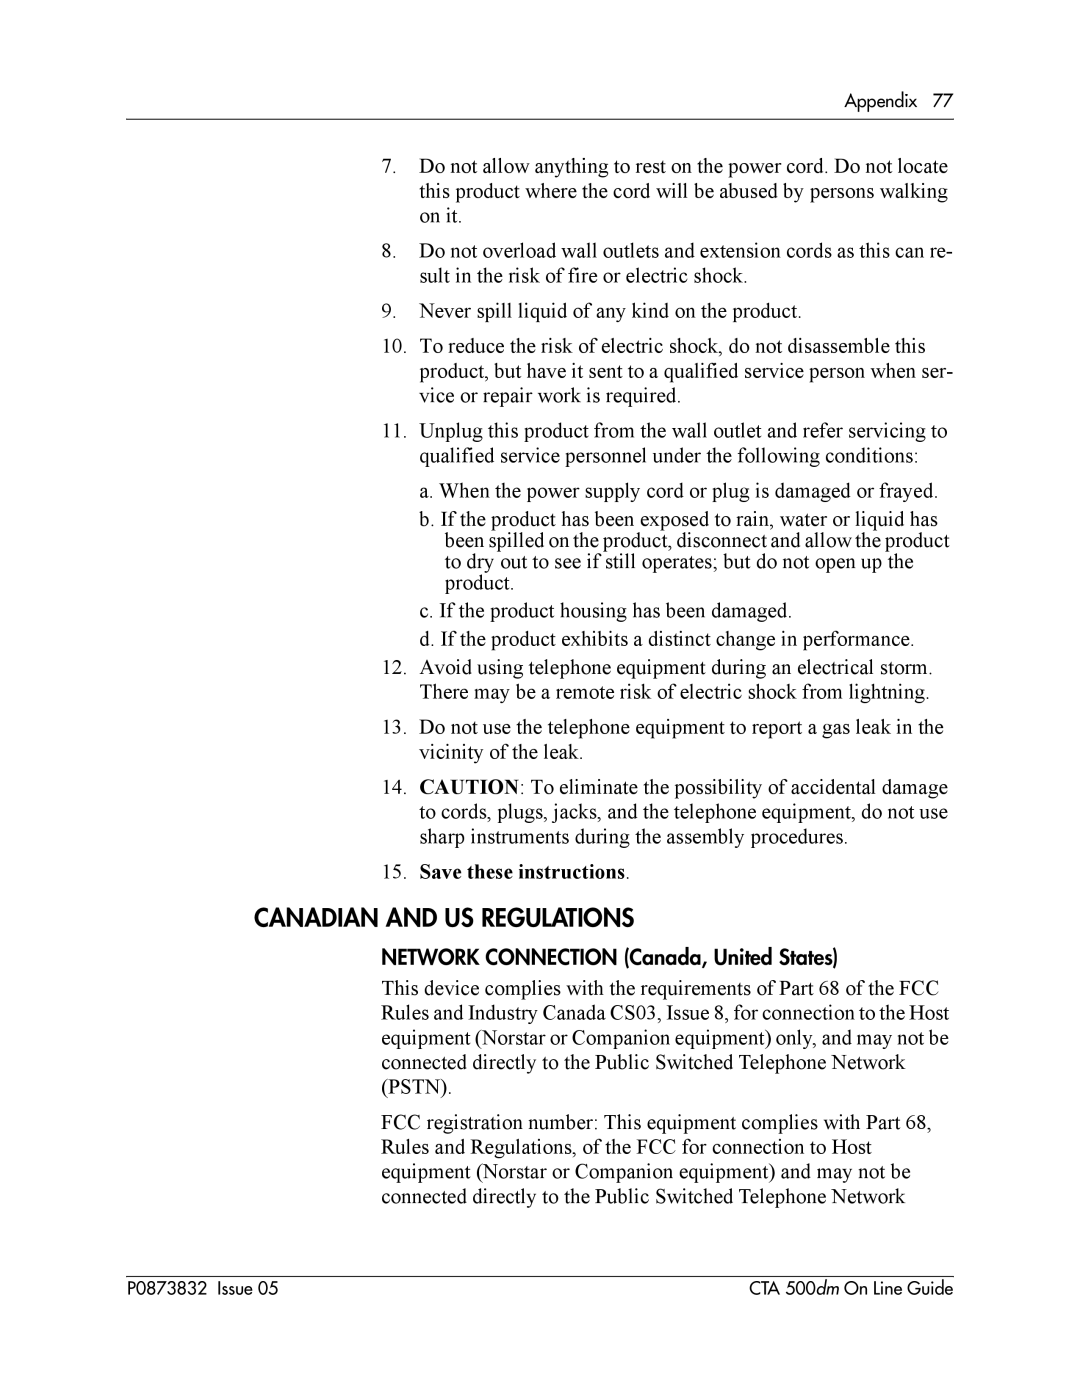 Nortel Networks CTA 500dm manual Canadian And Us Regulations, Save these instructions 